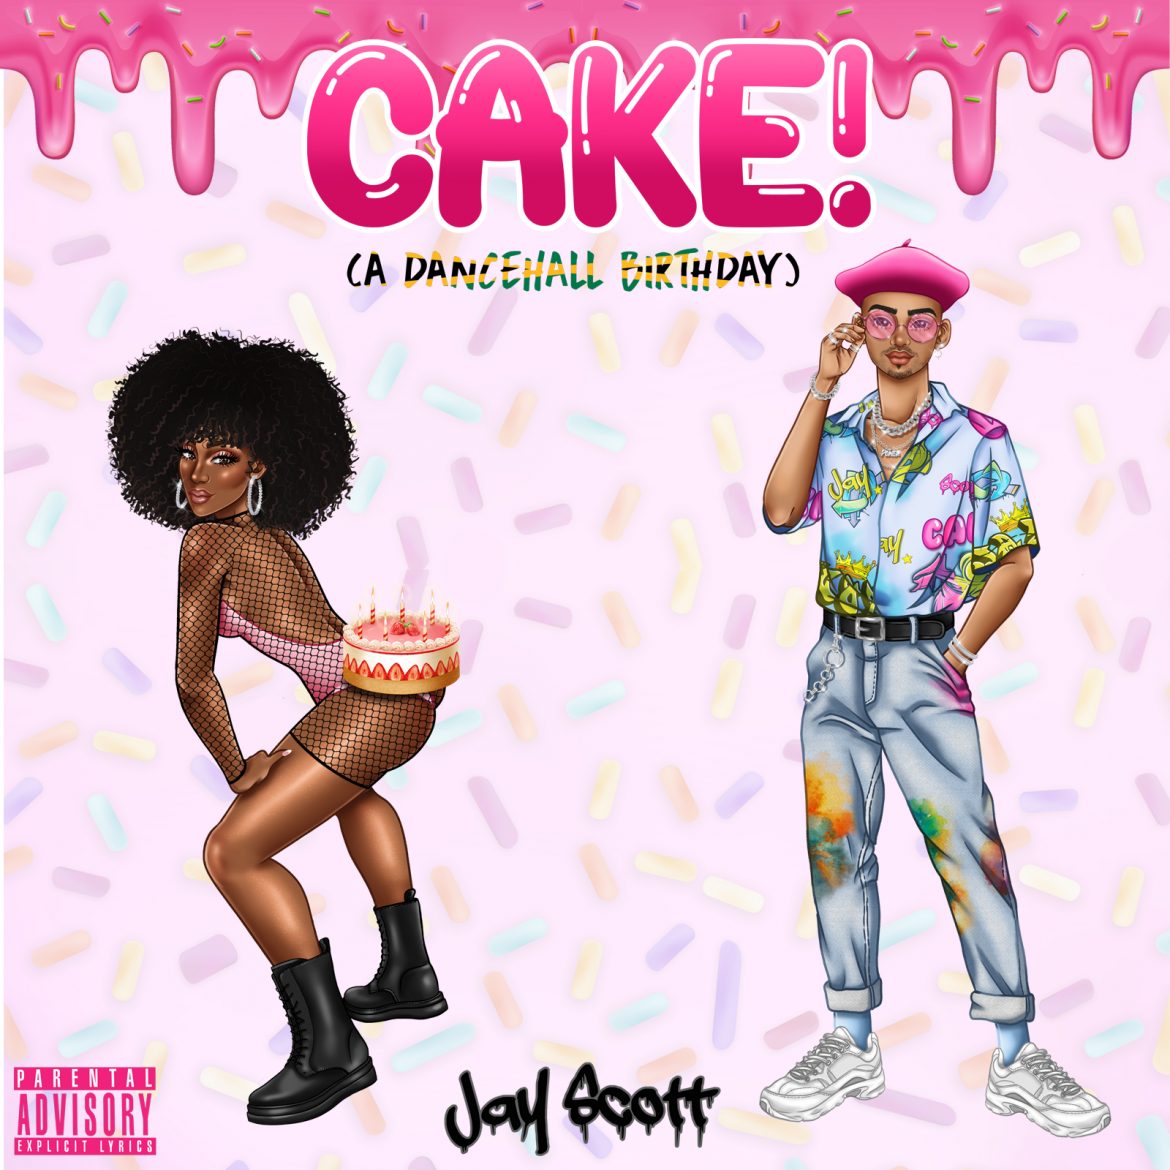 ‘Cake (A Dancehall Birthday)’ is the brand new track from ‘Jay Scott’ – Read the interview with Bafana FM